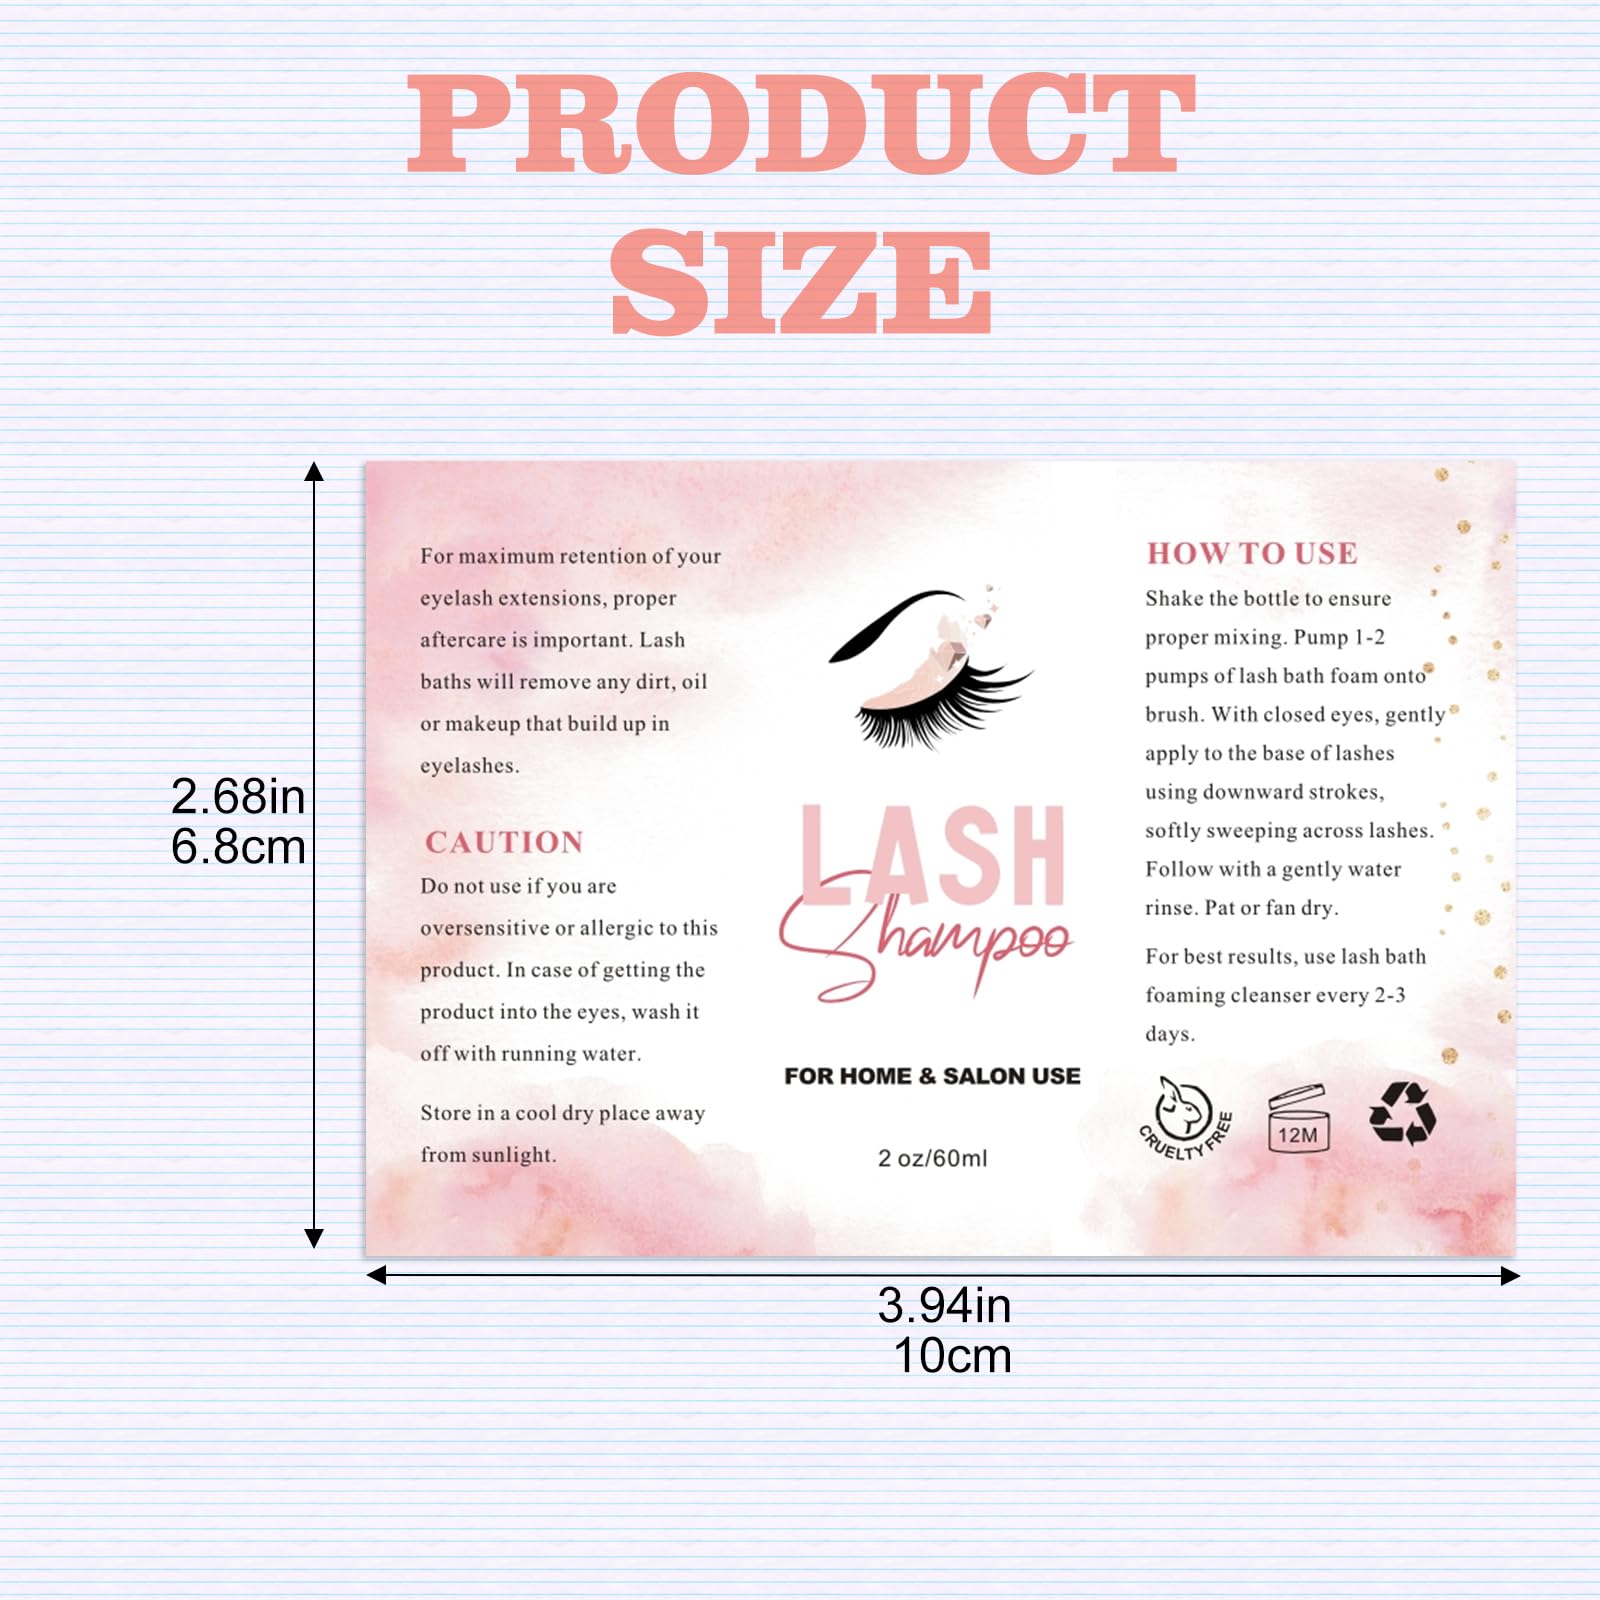 50PCS Lash Shampoo Label Stickers for Bottle, Lash Extension Stickers for Foam Pump Bottle Lash Bath Wash Label Personalised Stickers (B)